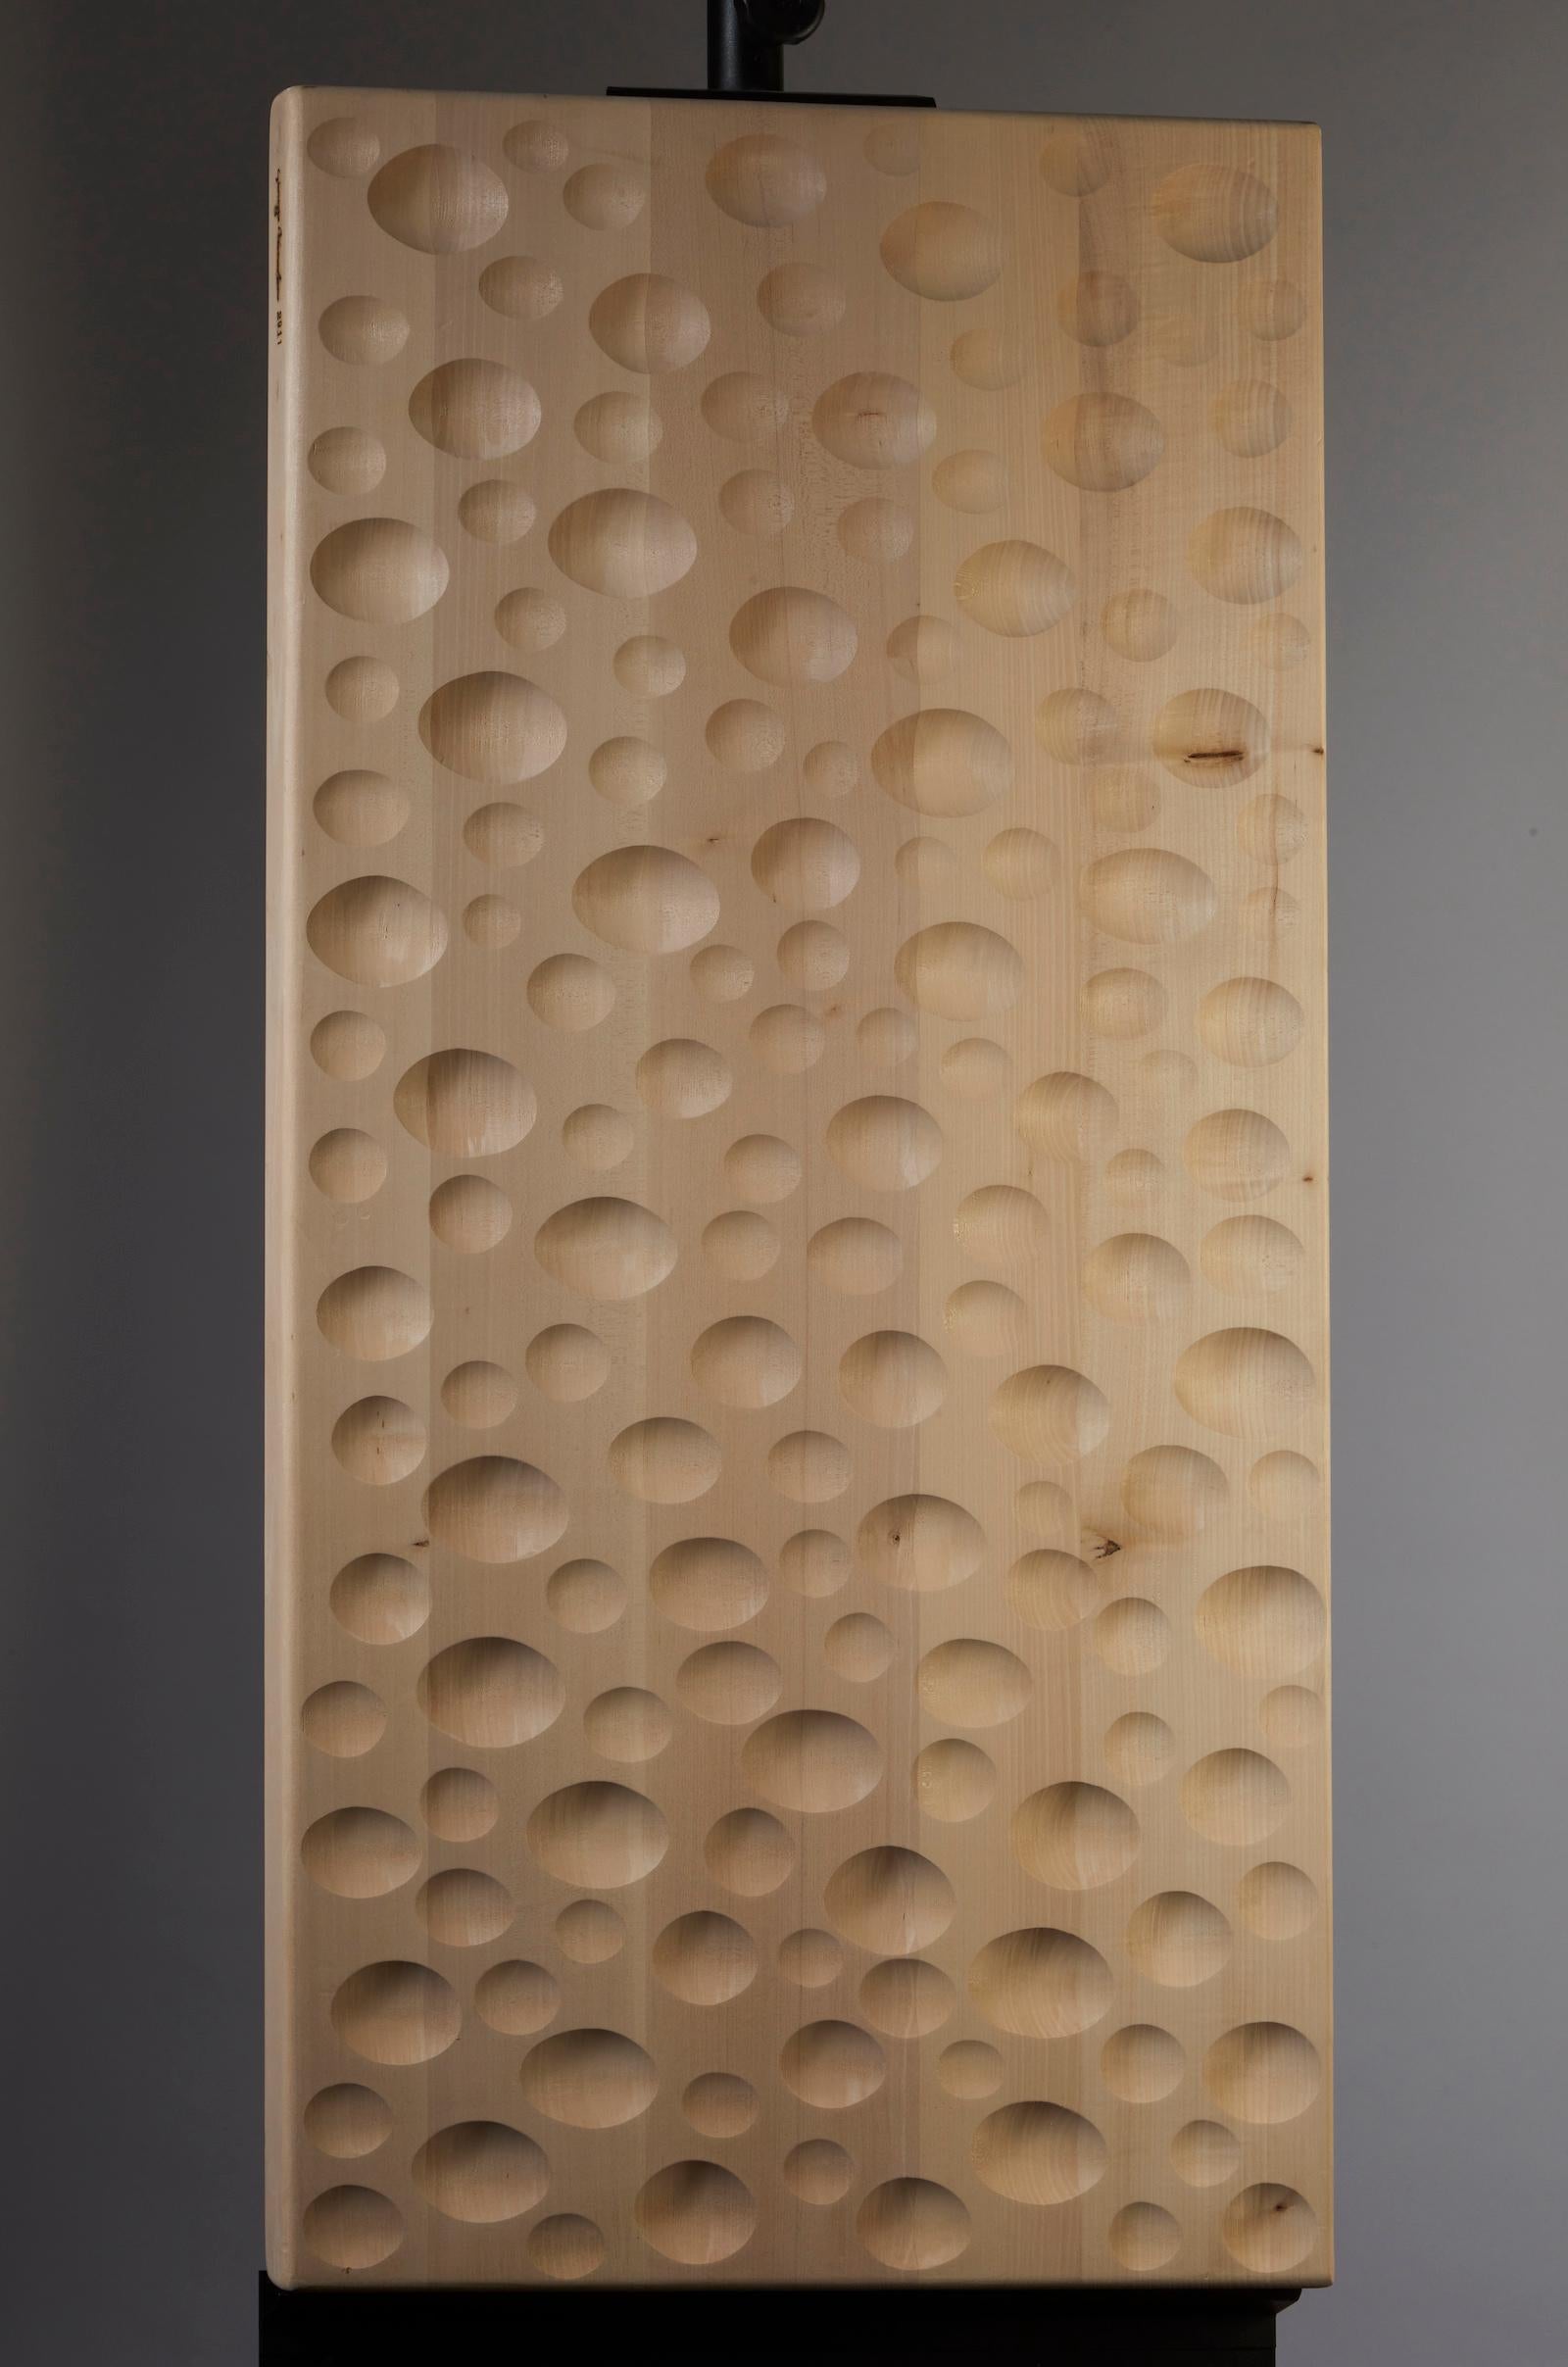 Giuseppe Rivadossi (Nave, July 8, 1935)

Ellipse carved panel of various sizes, 2011

Dimensions: 59.5 x 120 x 5 cm

With this panel  hand-carved Master Giuseppe Rivadossi created, repeating in form and quality of execution the ornamentation